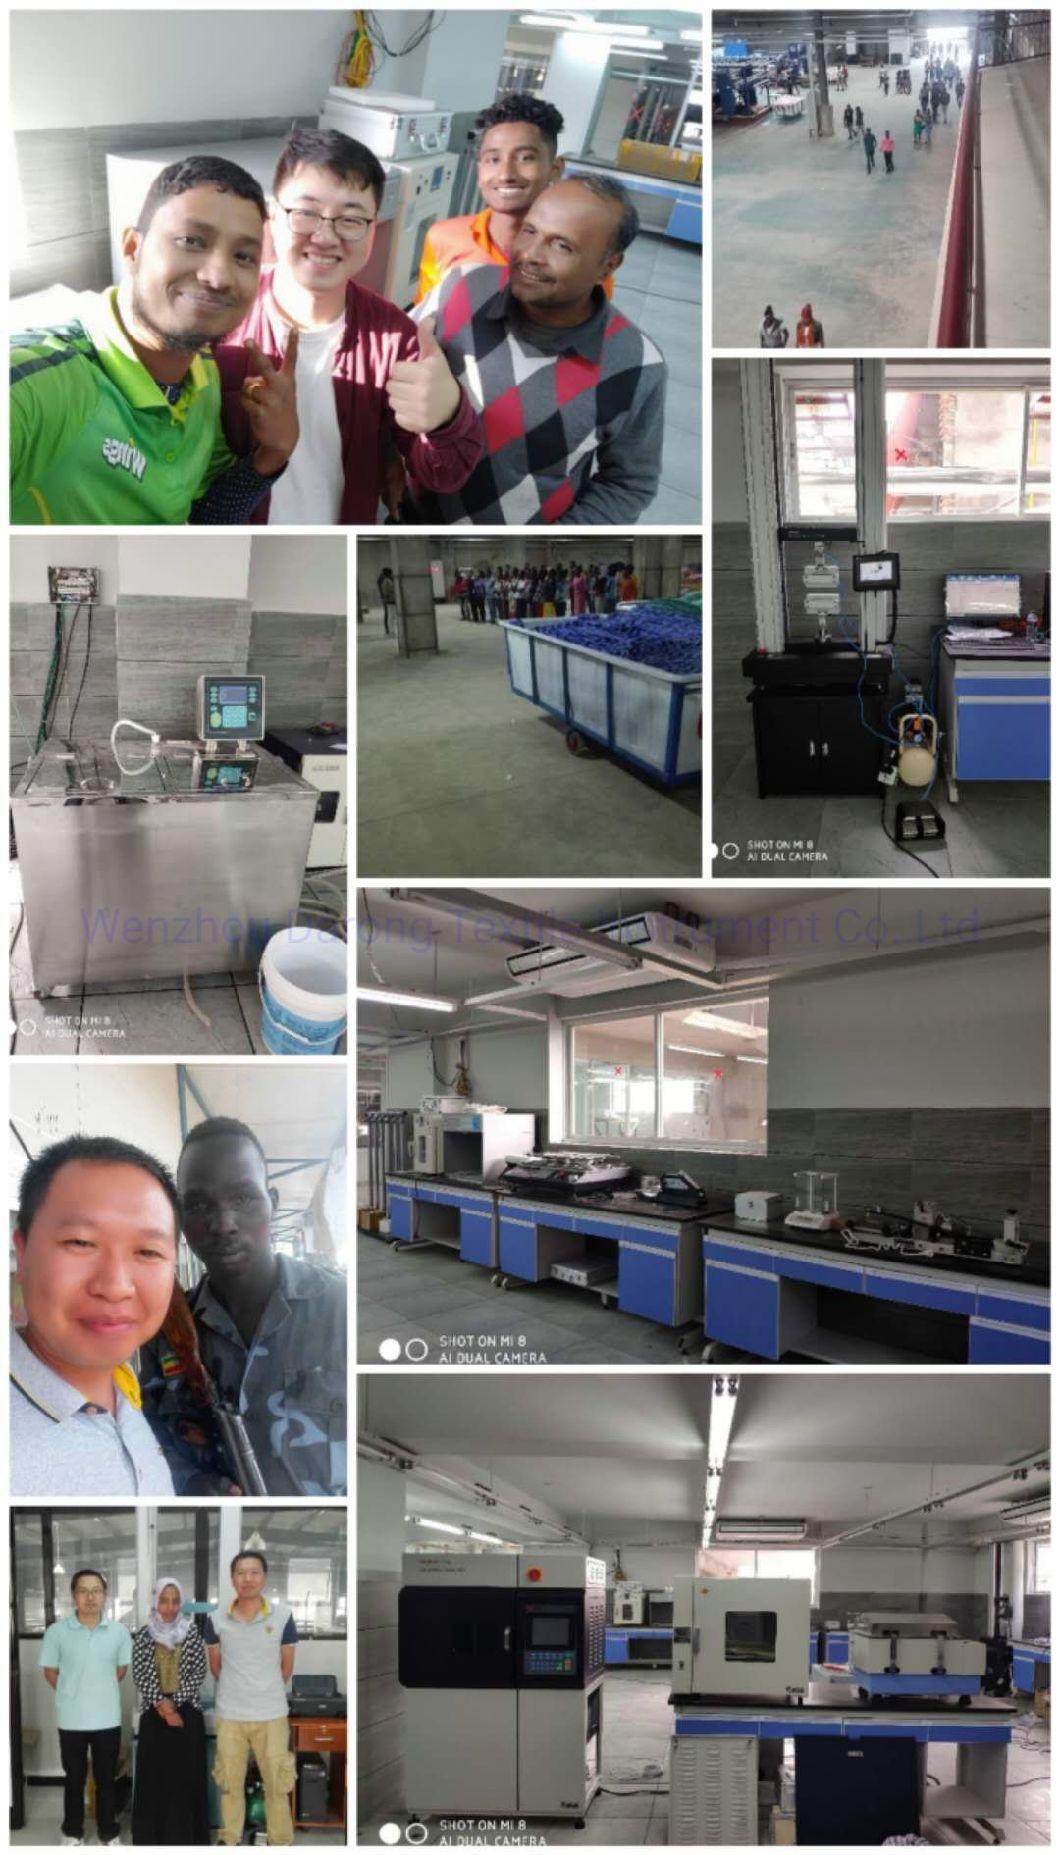 Fabric Printing Dyeing Rotary Rubbing Friction Textile Test Equipment